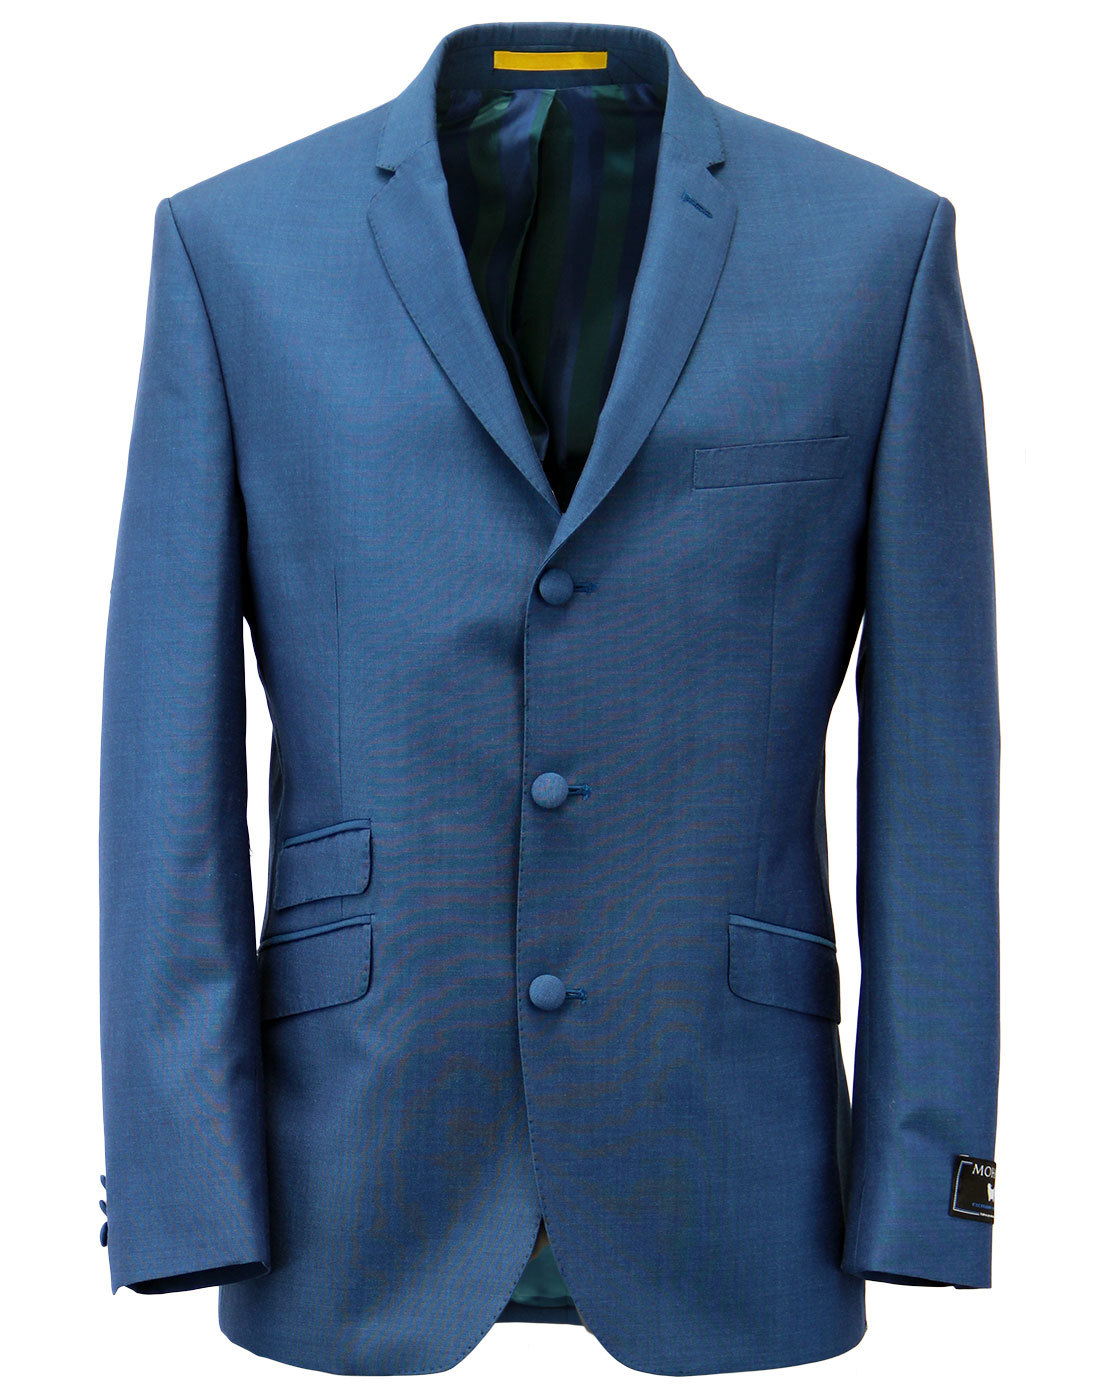 Retro 1960s Mod Mohair Blend 3 Button Suit Jacket in Turquoise